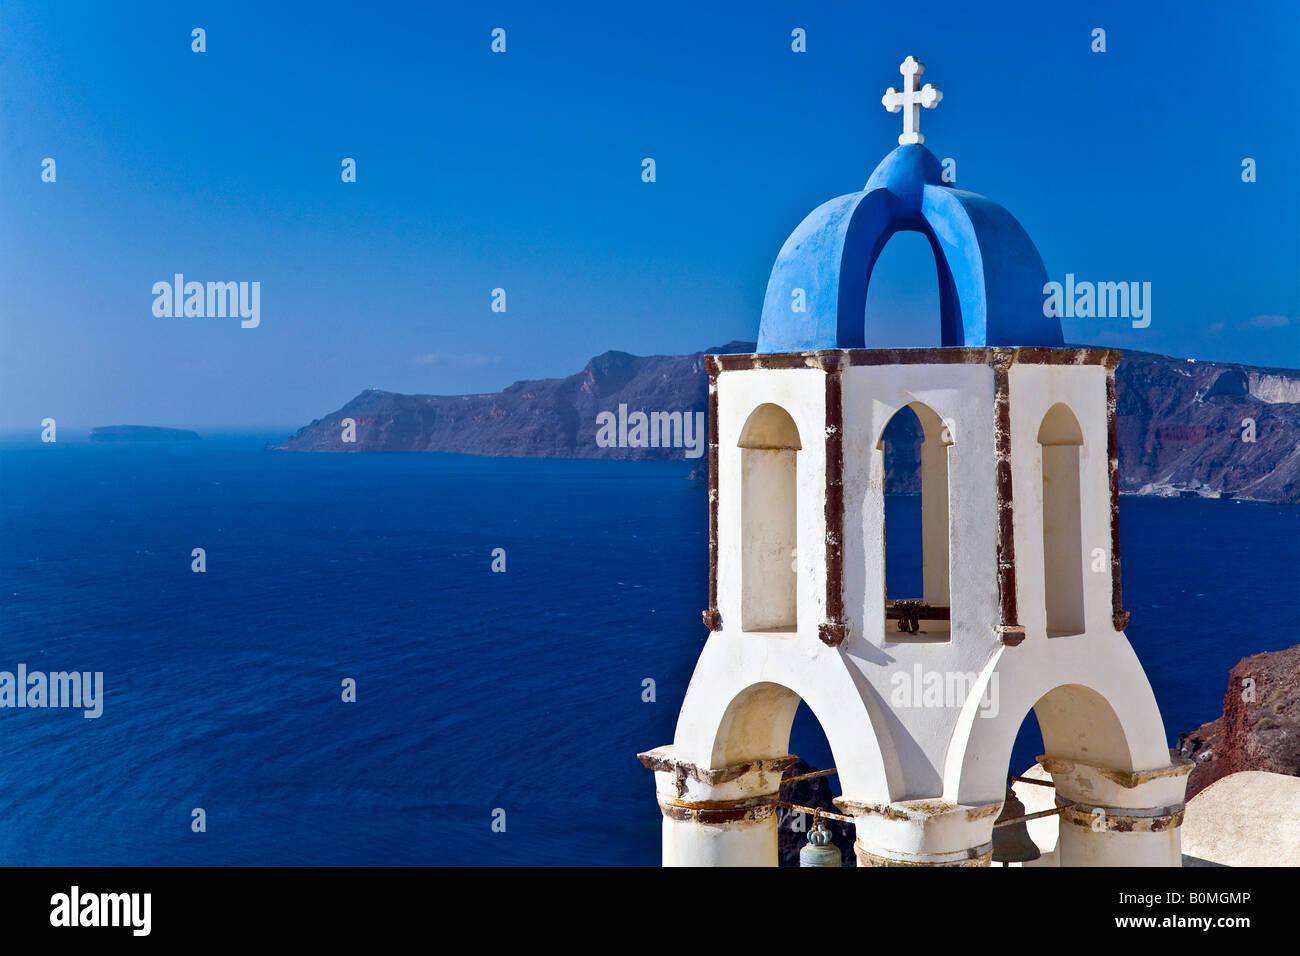 Blue and white church tower with ocean view Oia, Santorini, Greece Stock Photo